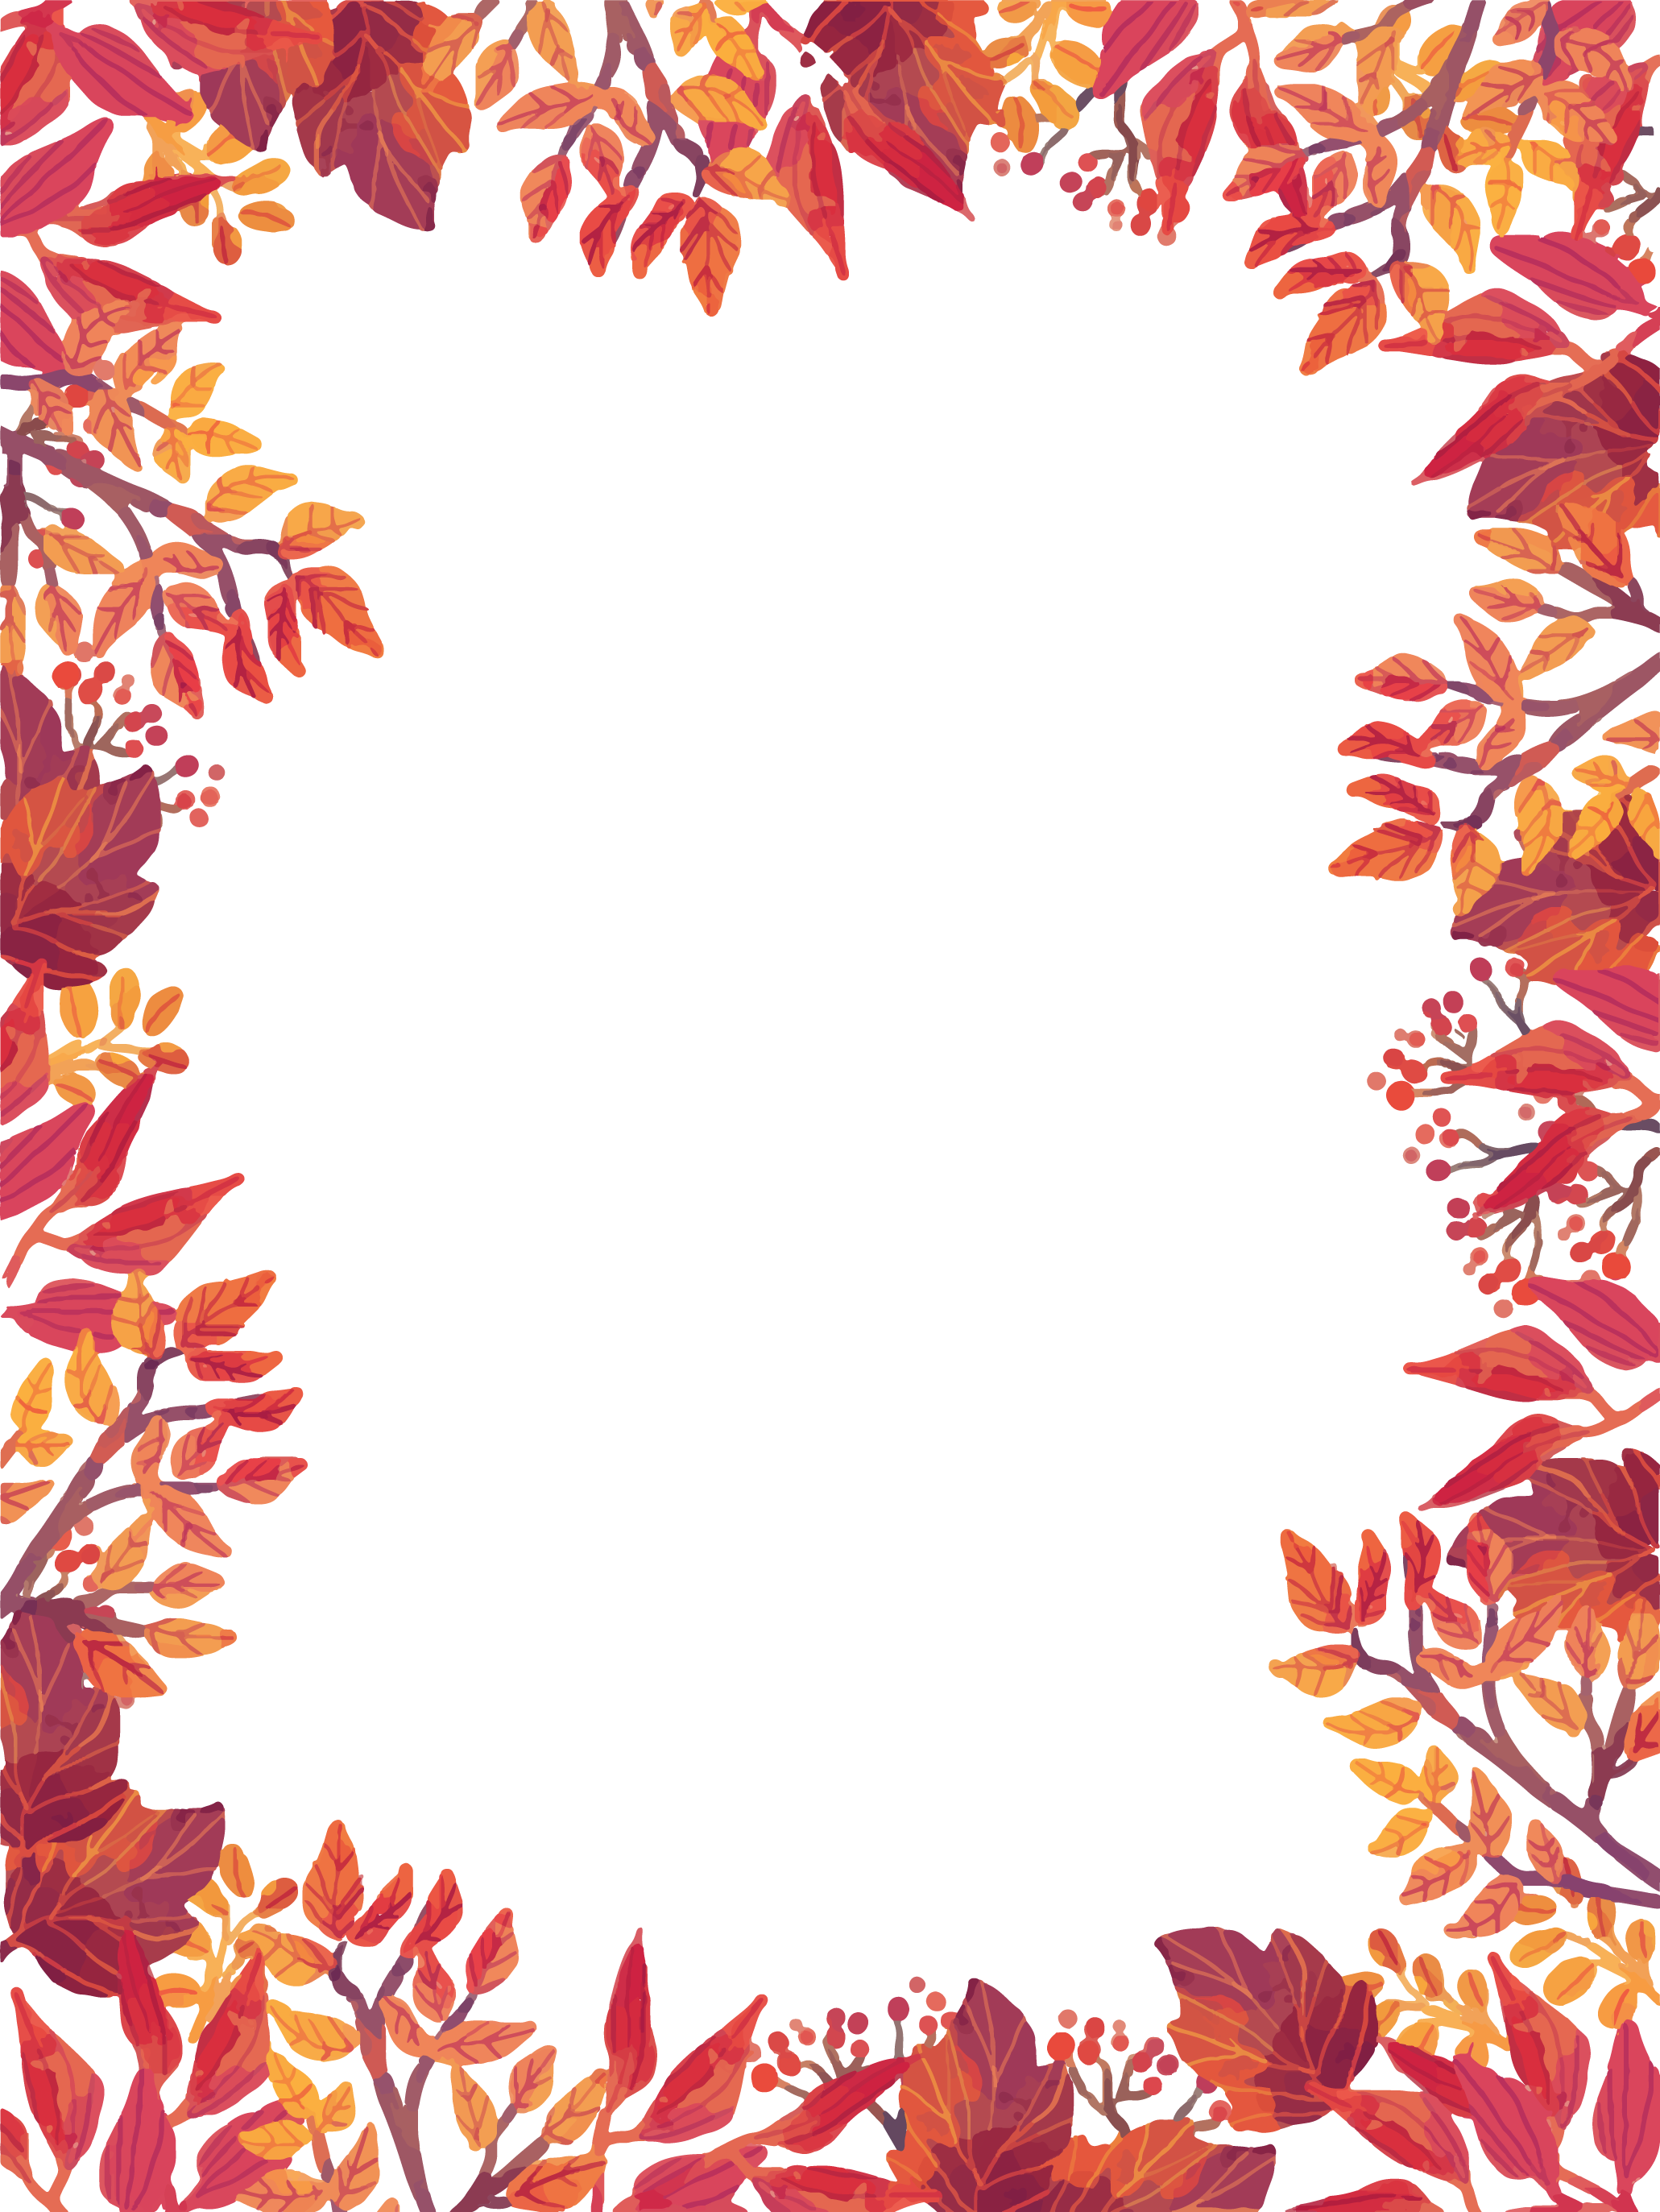 Flyer Autumn Template Harvest Festival - Thankful Wallpaper For Iphone (2061x2746)